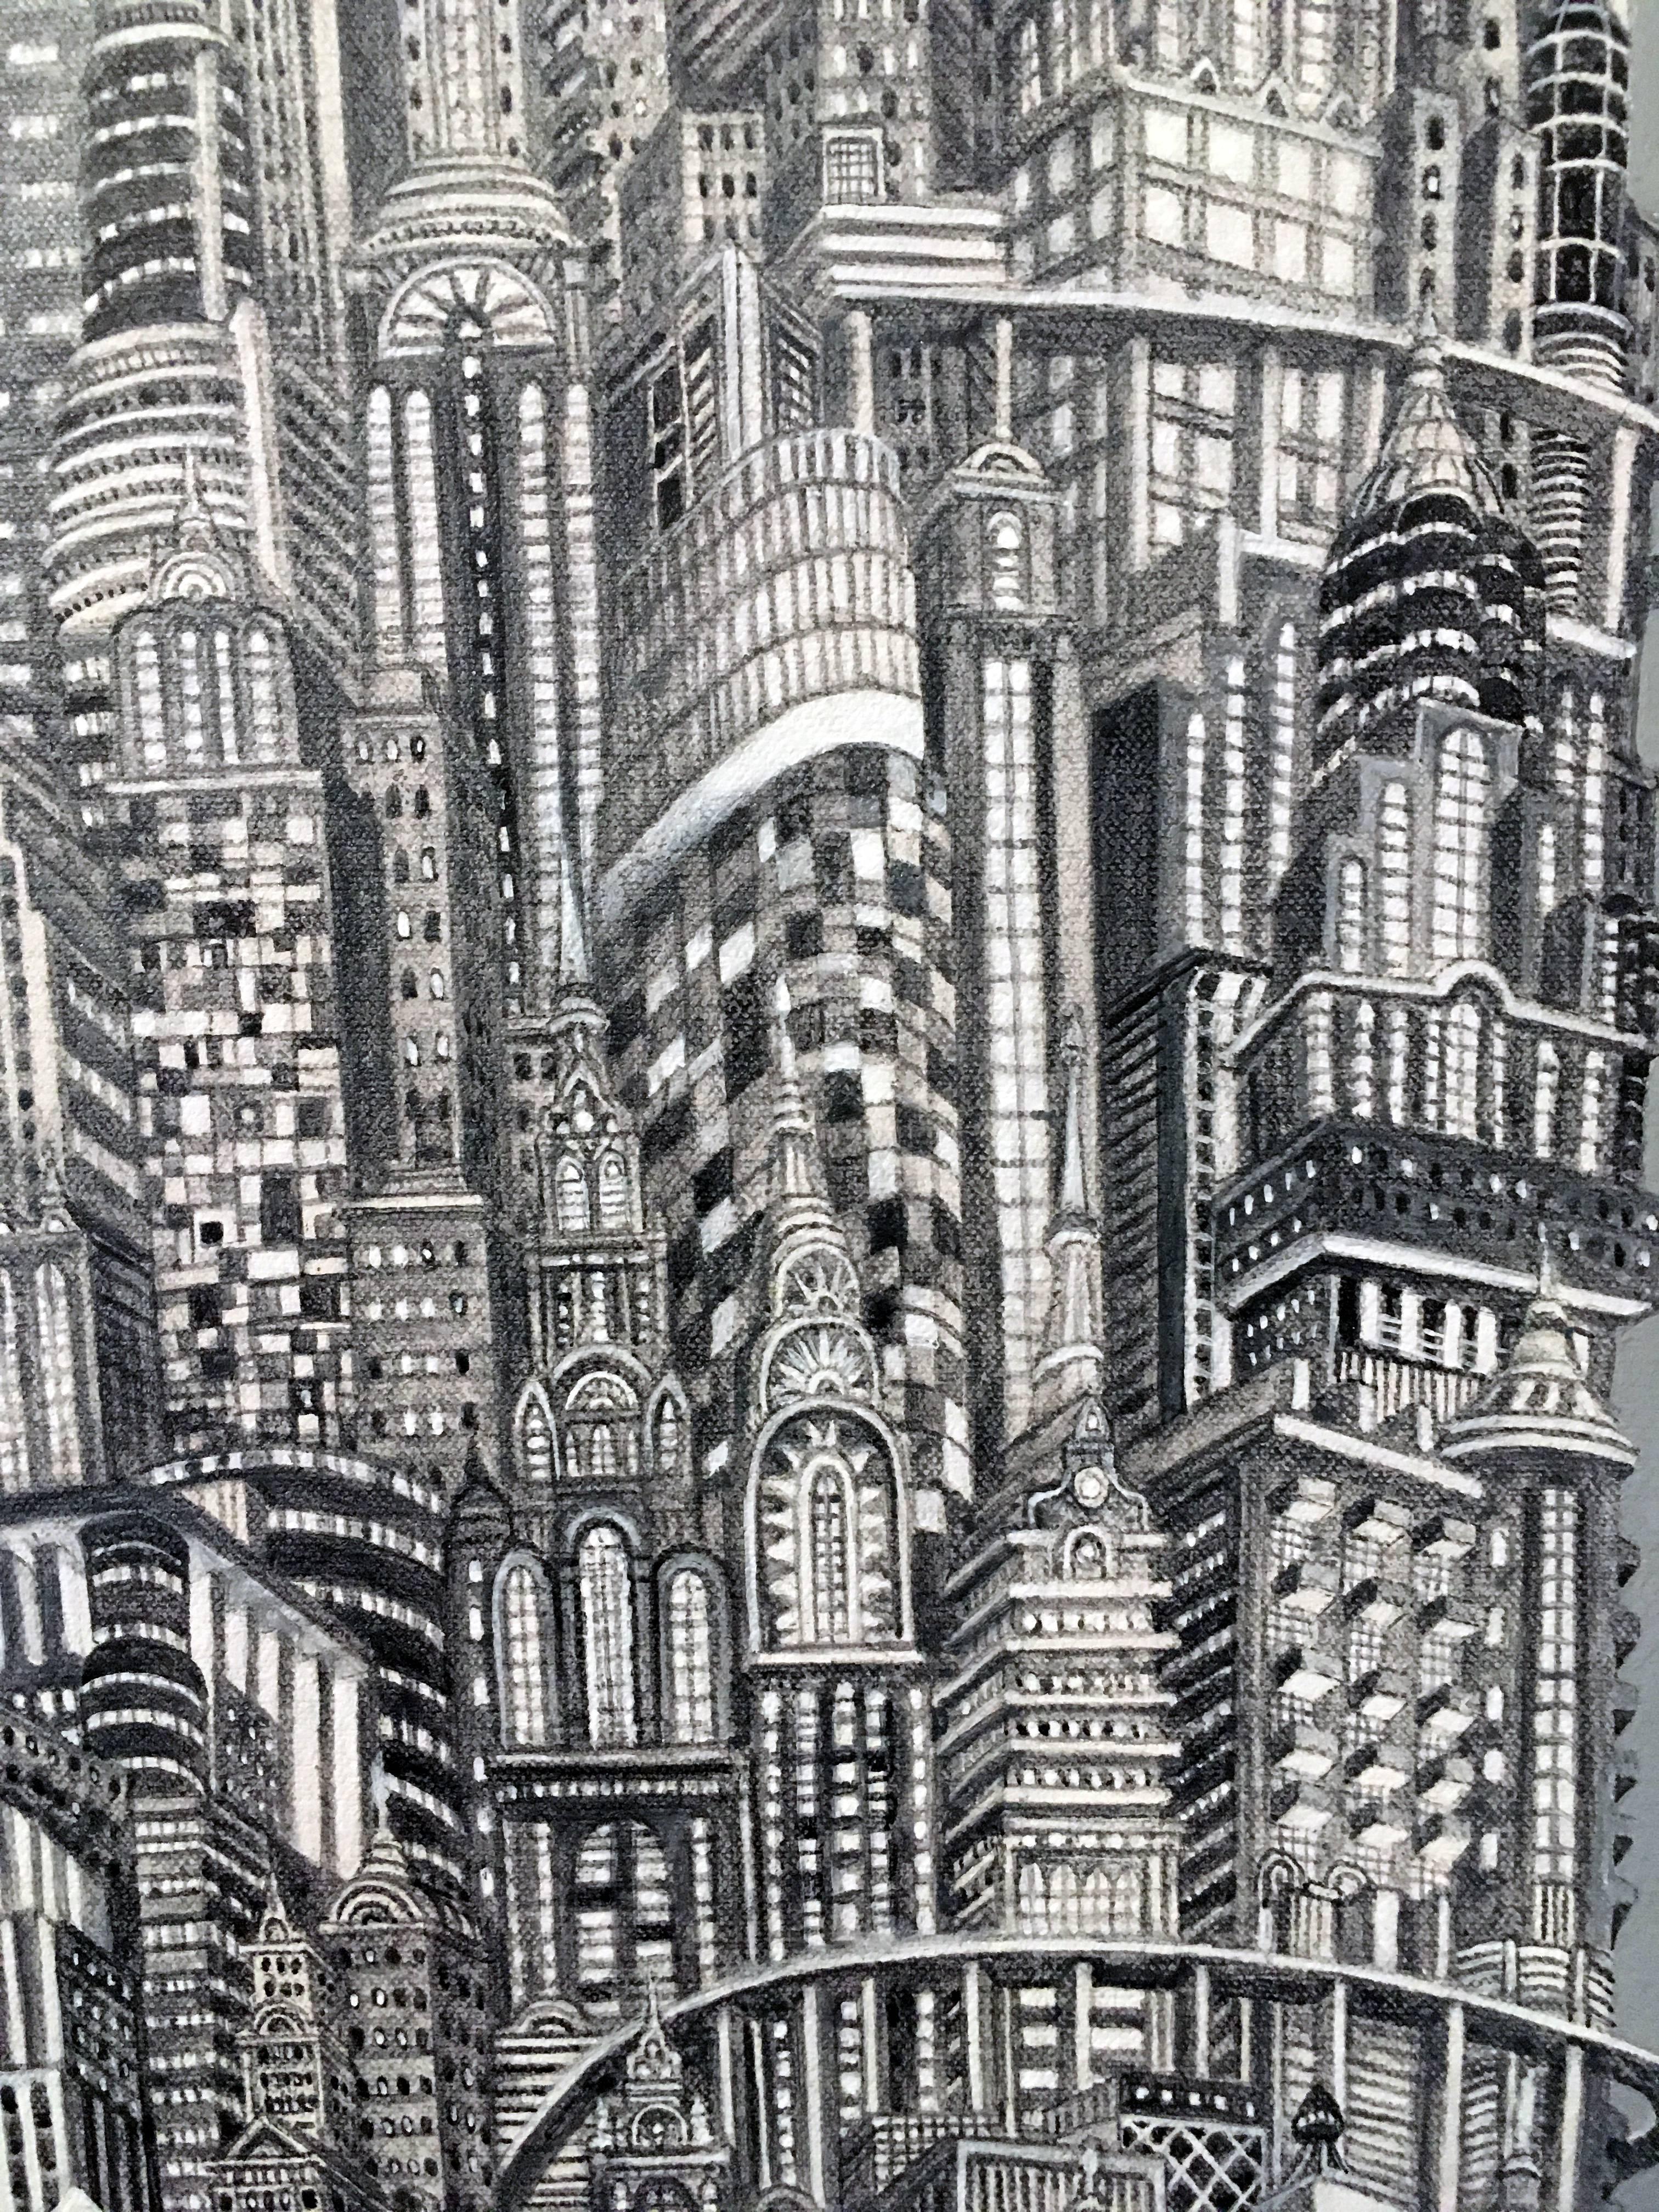 Silver Tower is a painted cityscape by Colombian artist, Alexis Duque.  It is highly detailed, acrylic on canvas, 24x12.  This painting is a reimagined metropolis but based on many iconic New York City buildings. The intricate architectural